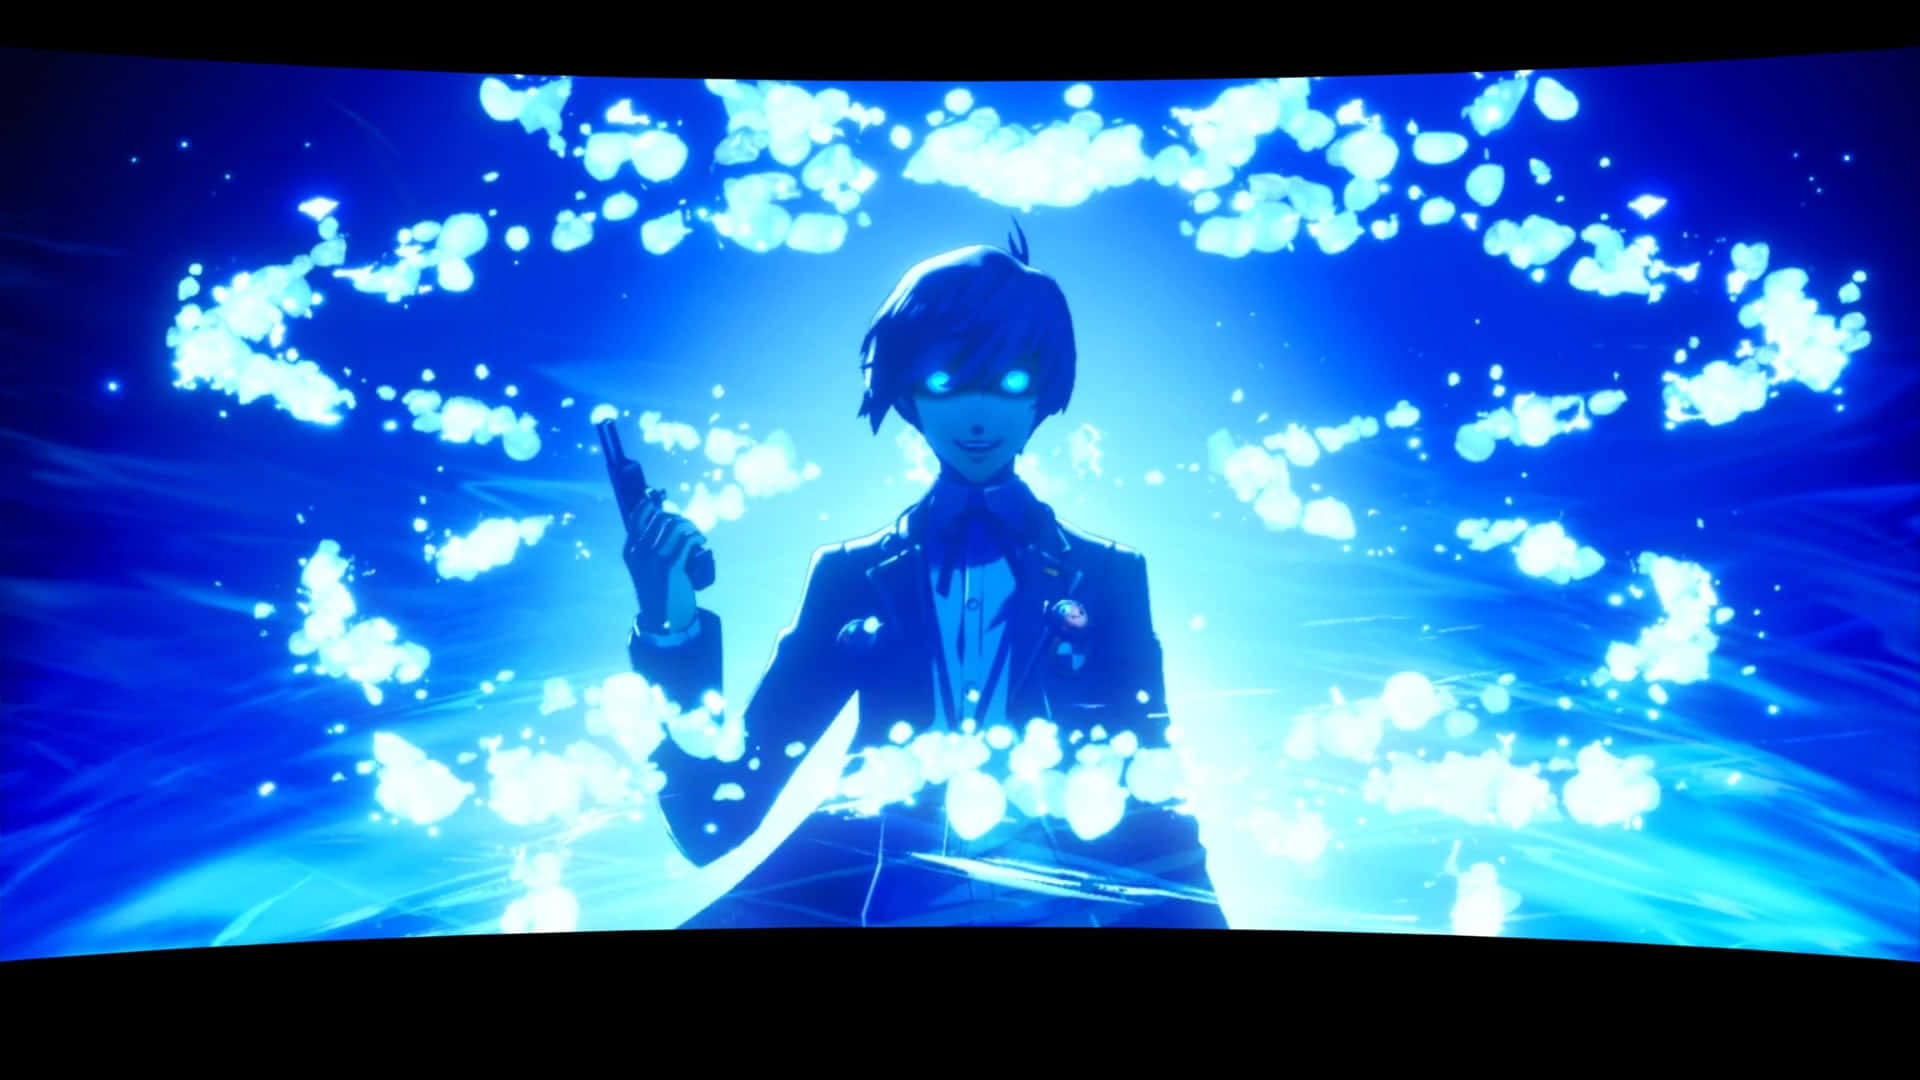 Persona3 Character Evoking Power Wallpaper